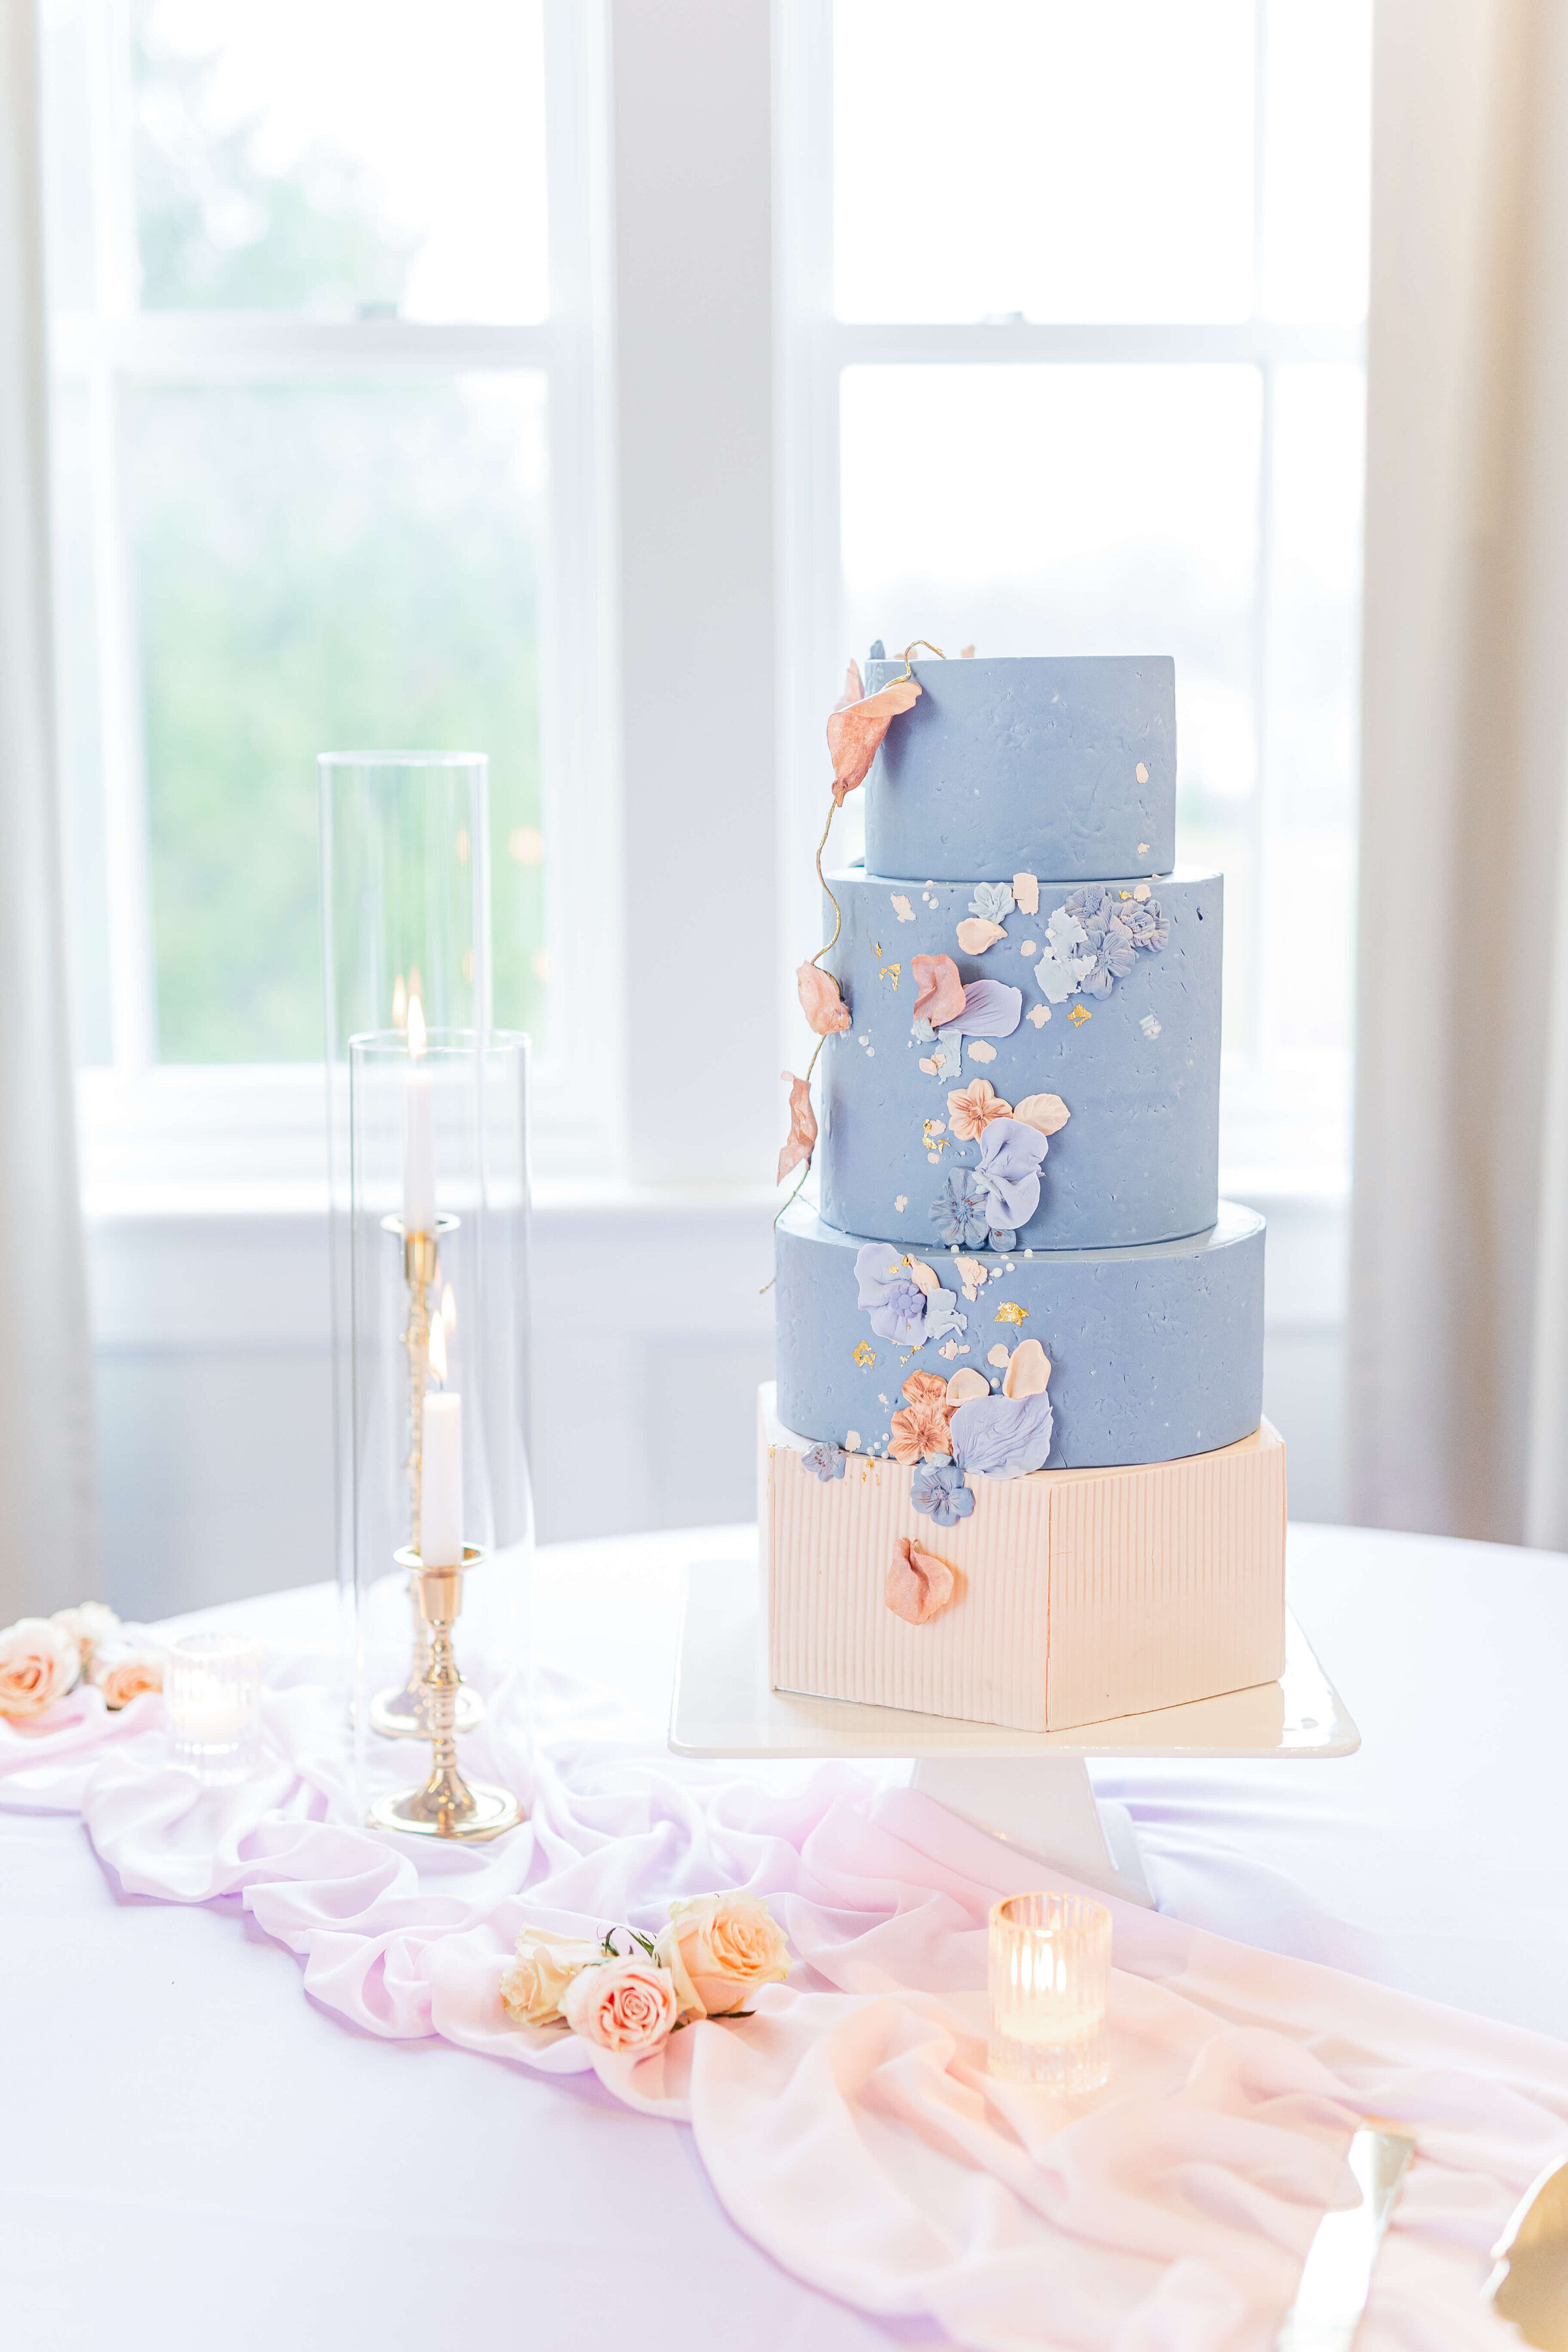 A wedding cake with a light pink bottom tier and two blue tiers on top of it with smaller flowers on the cake. A candlestick sits on the table next to the cake. Taken by a Dayton wedding photographer